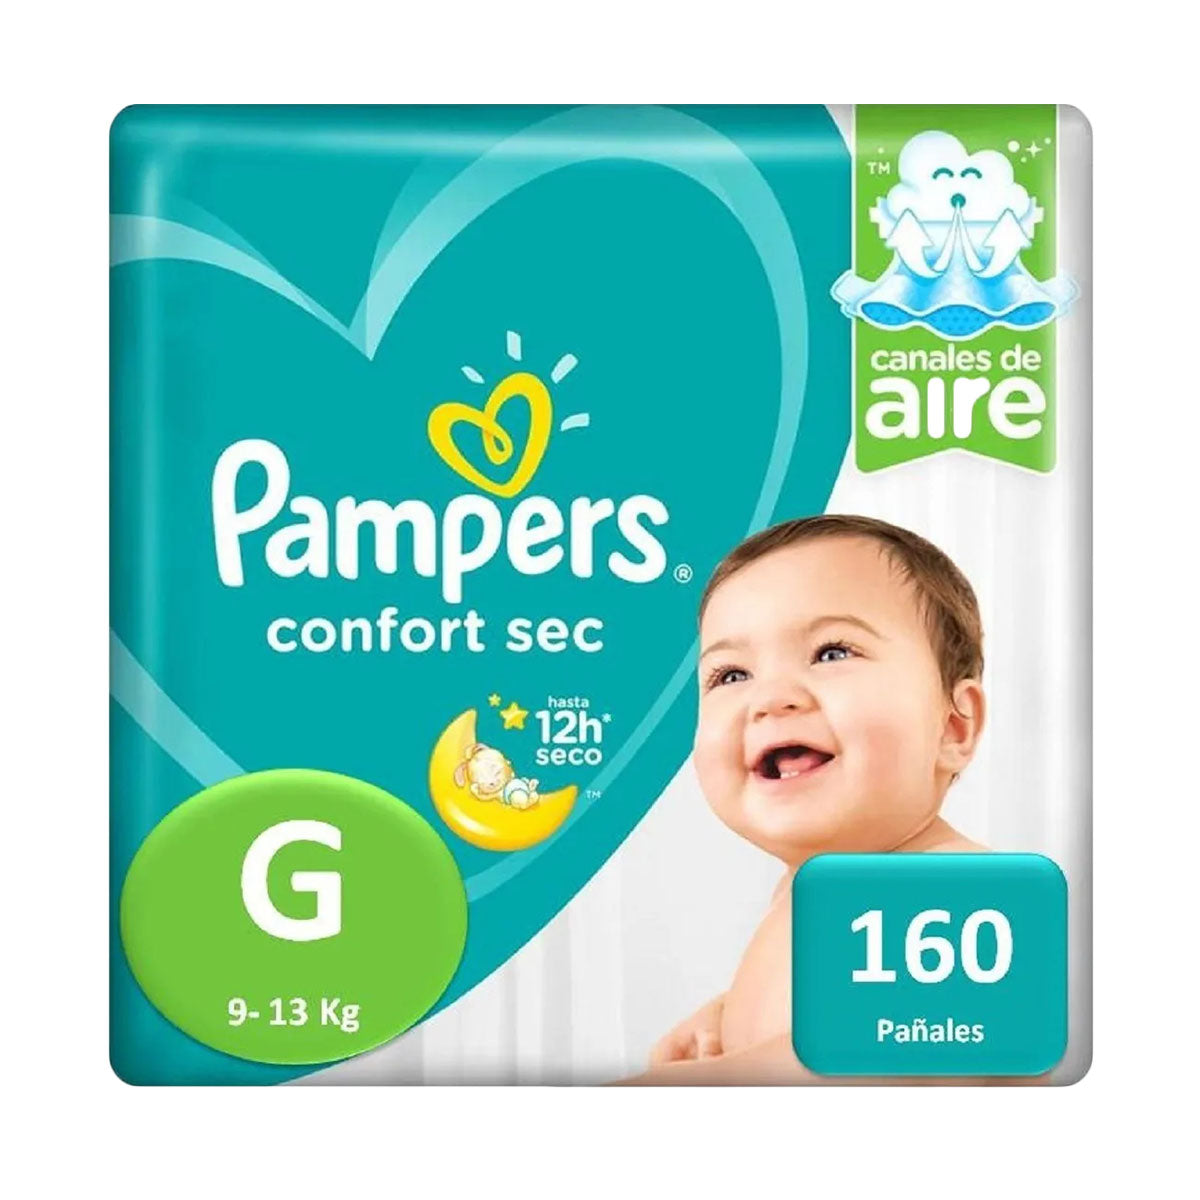 Pañales Pampers Confort Sec G (160 unidades)